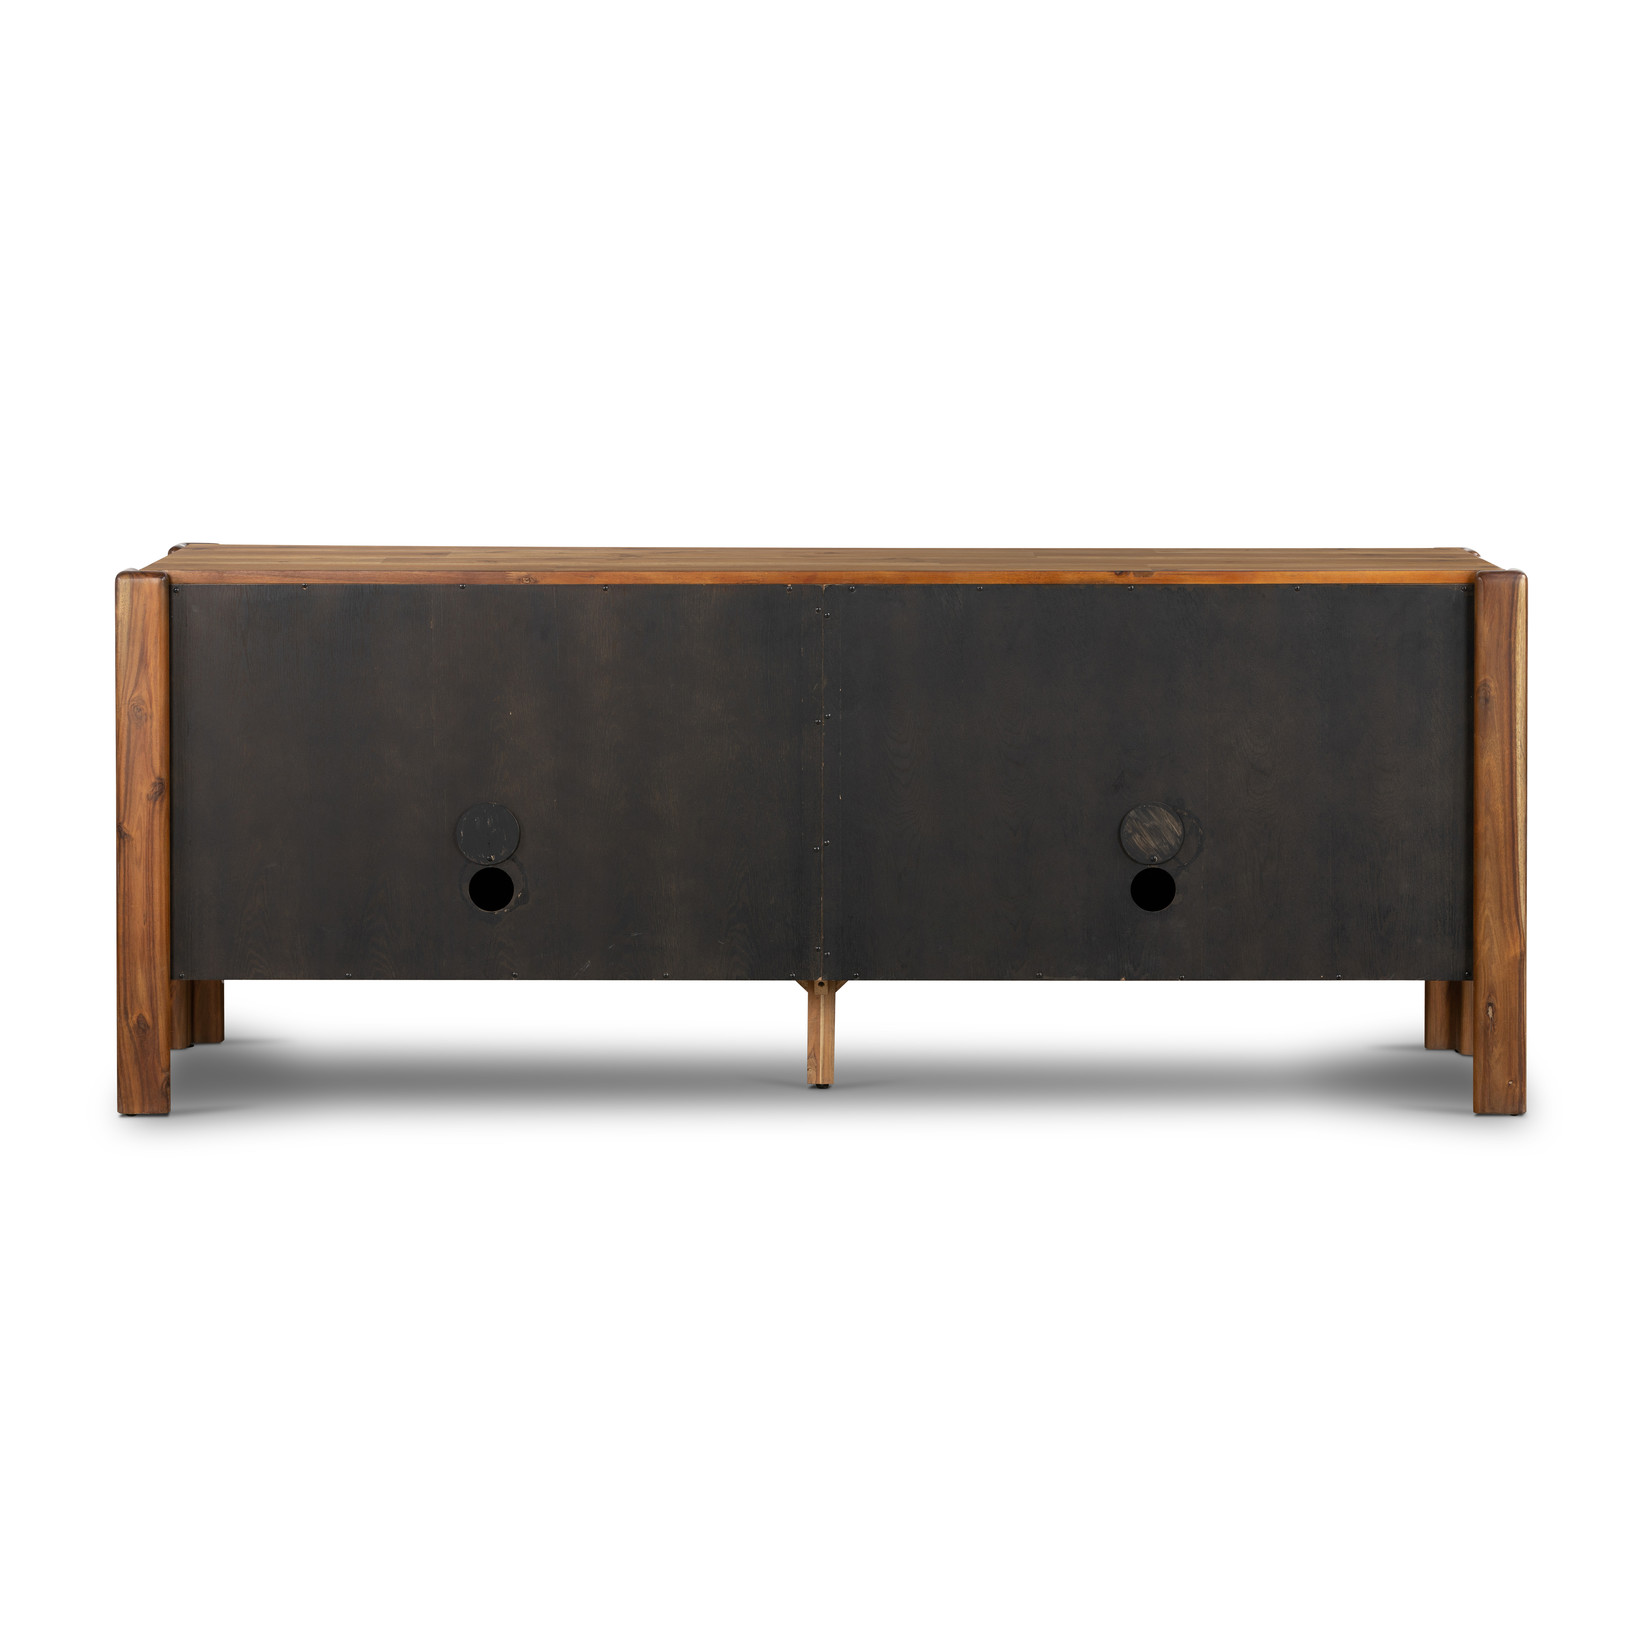 Four Hands Orla Sideboard Toasted Acacia